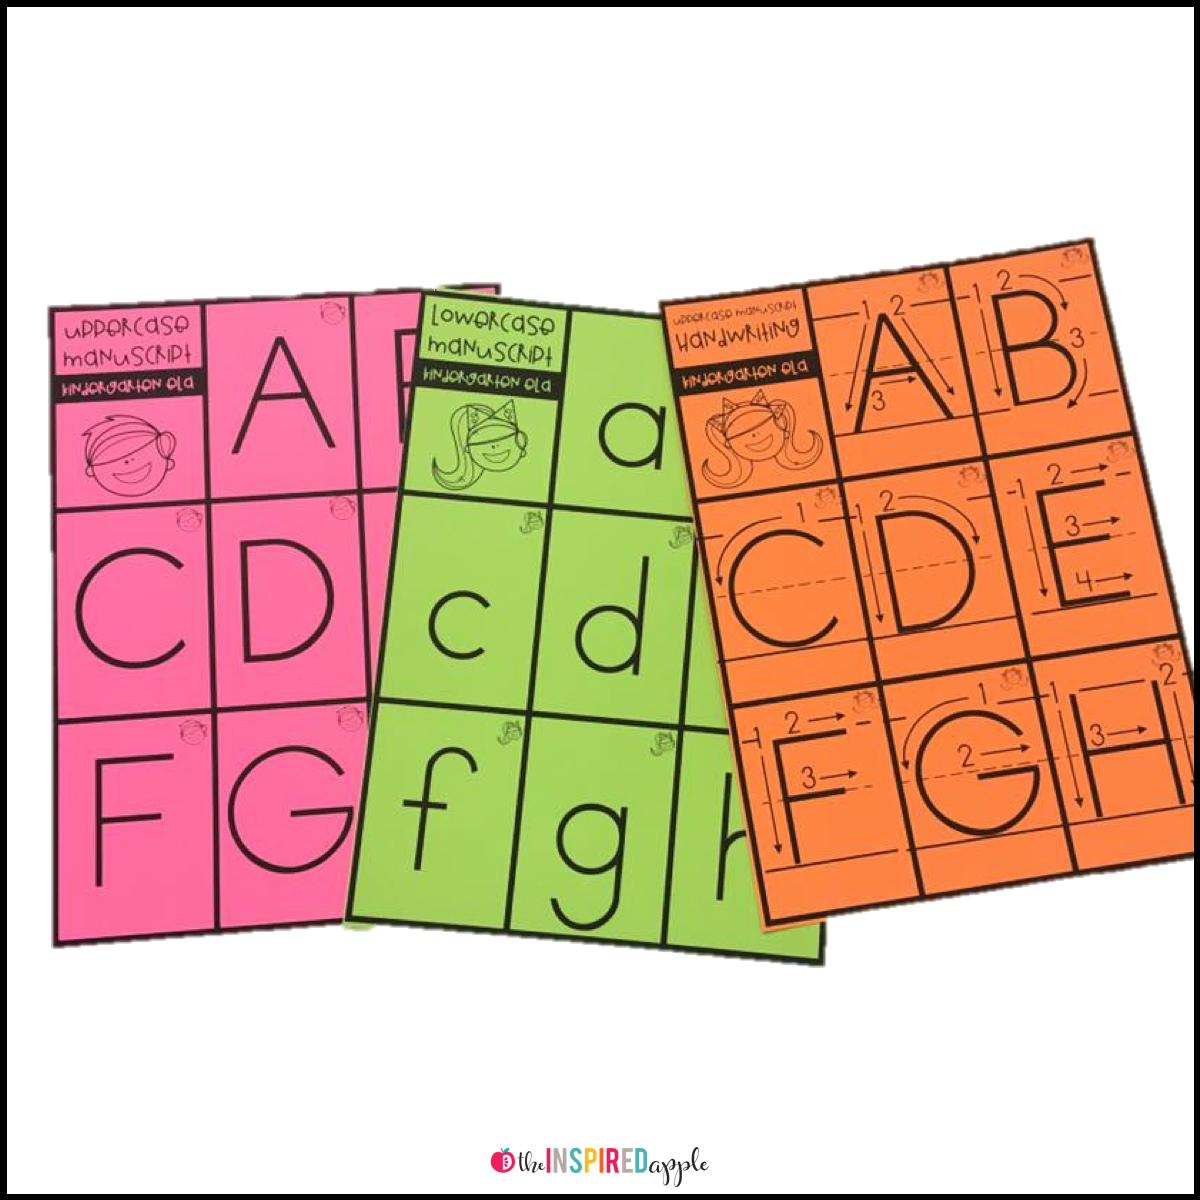 This resource is a growing mega bundle of 50 sets of flashcards for use in the kindergarten and first grade classrooms. Each set can be used to address a variety of skills, from phonics to writing to decoding to letter recognition and MORE! They're the perfect teacher tool because they're easy to prep, versatile, inexpensive and can accompany just about anything you're doing in your ELA curriculum. Use them during guided reading, small group instruction, intervention, partner practice or individual student differentiation!